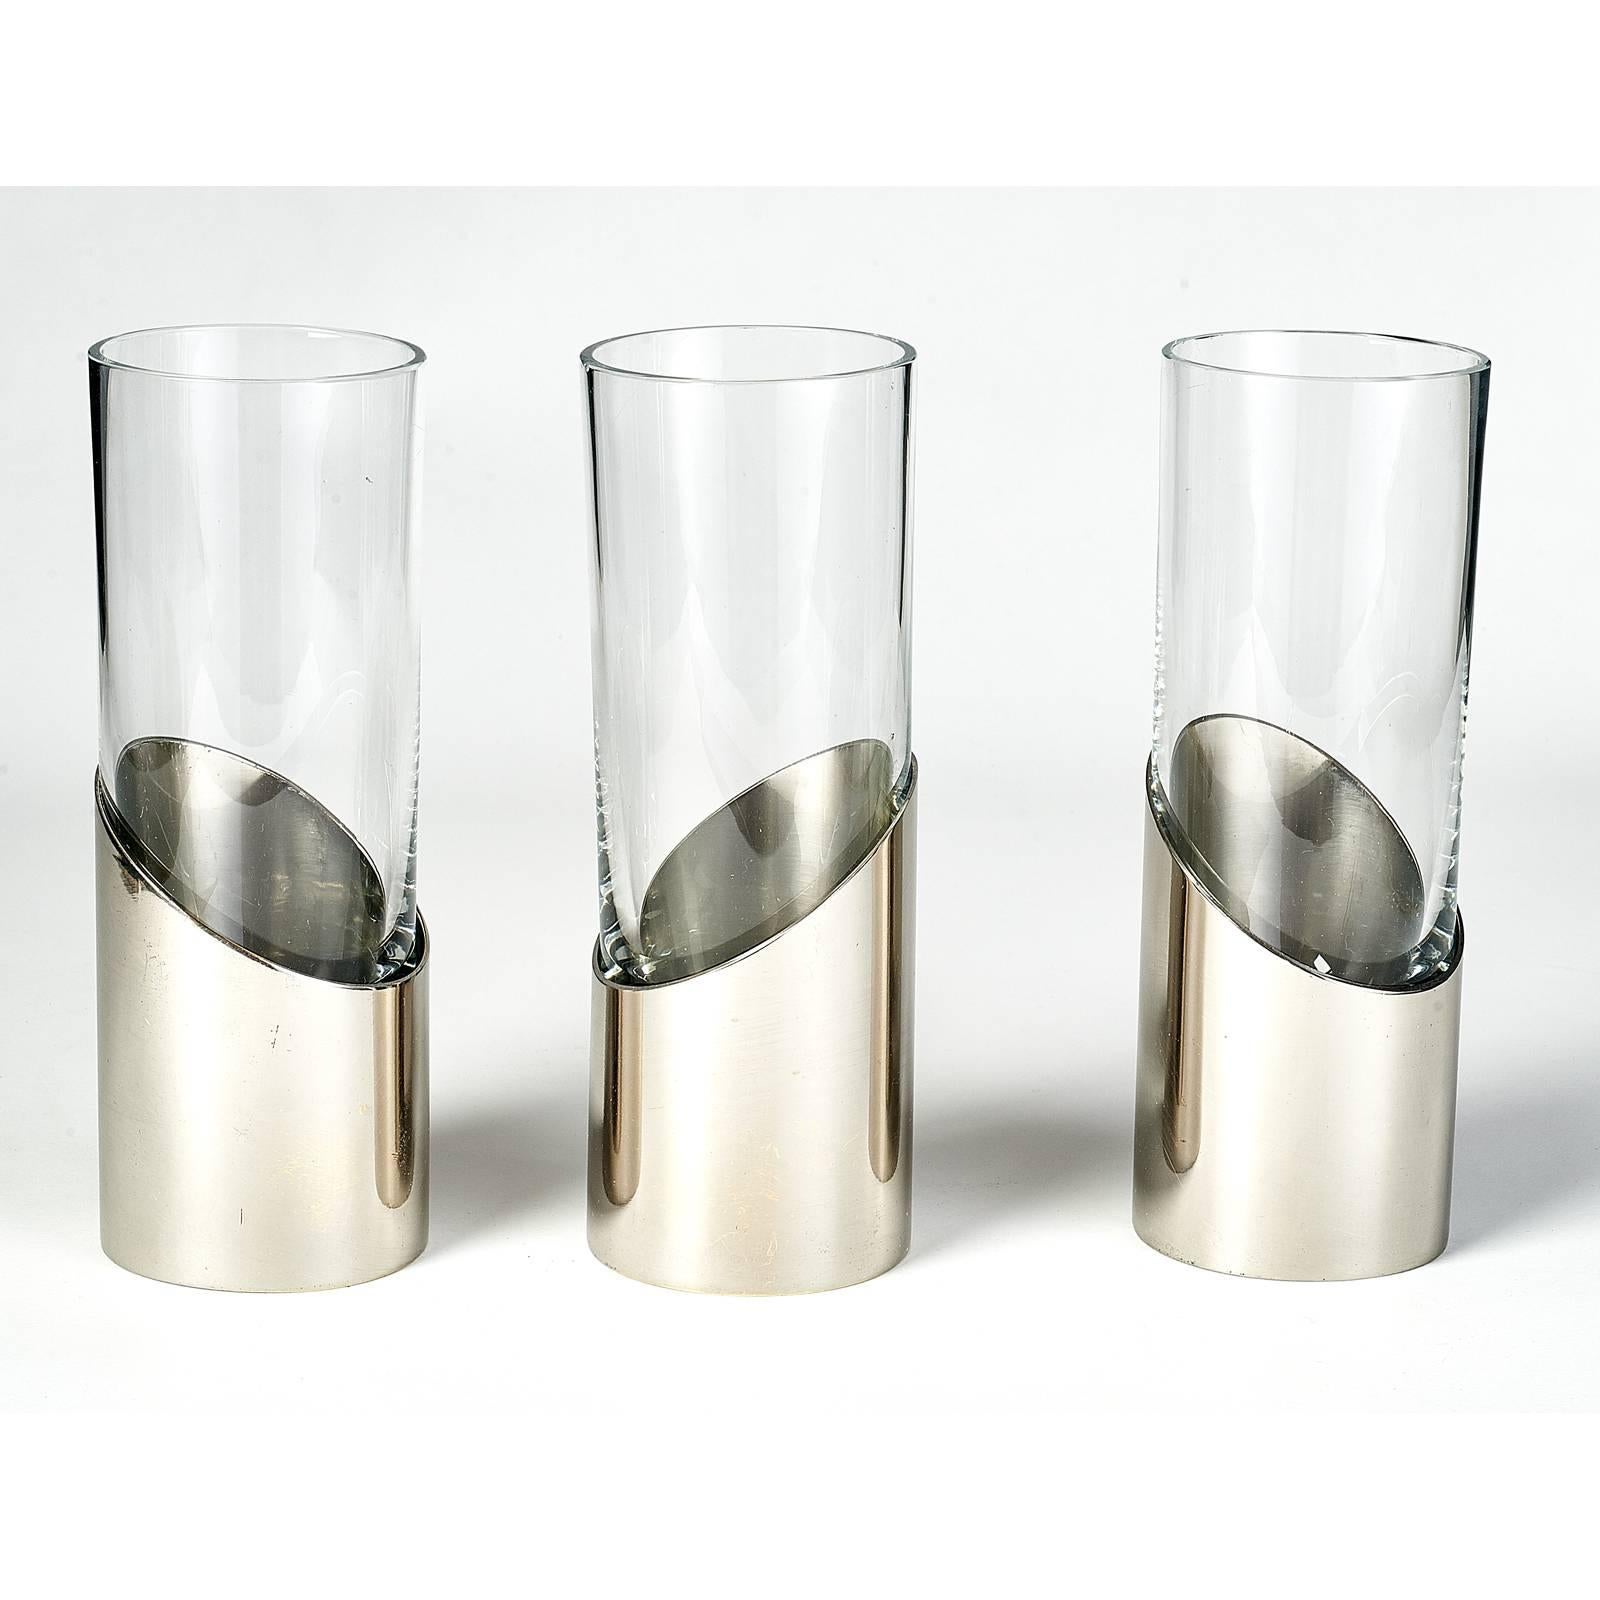 GABRIELLA CRESPI ( 1922-2017 )
Set of three modernist bud vases
Silvered brass and glass,
Signed on base . Italy, 1970s
Dimensions: 7 H x 2.5 Diameter
Priced and sold as a set. 

 